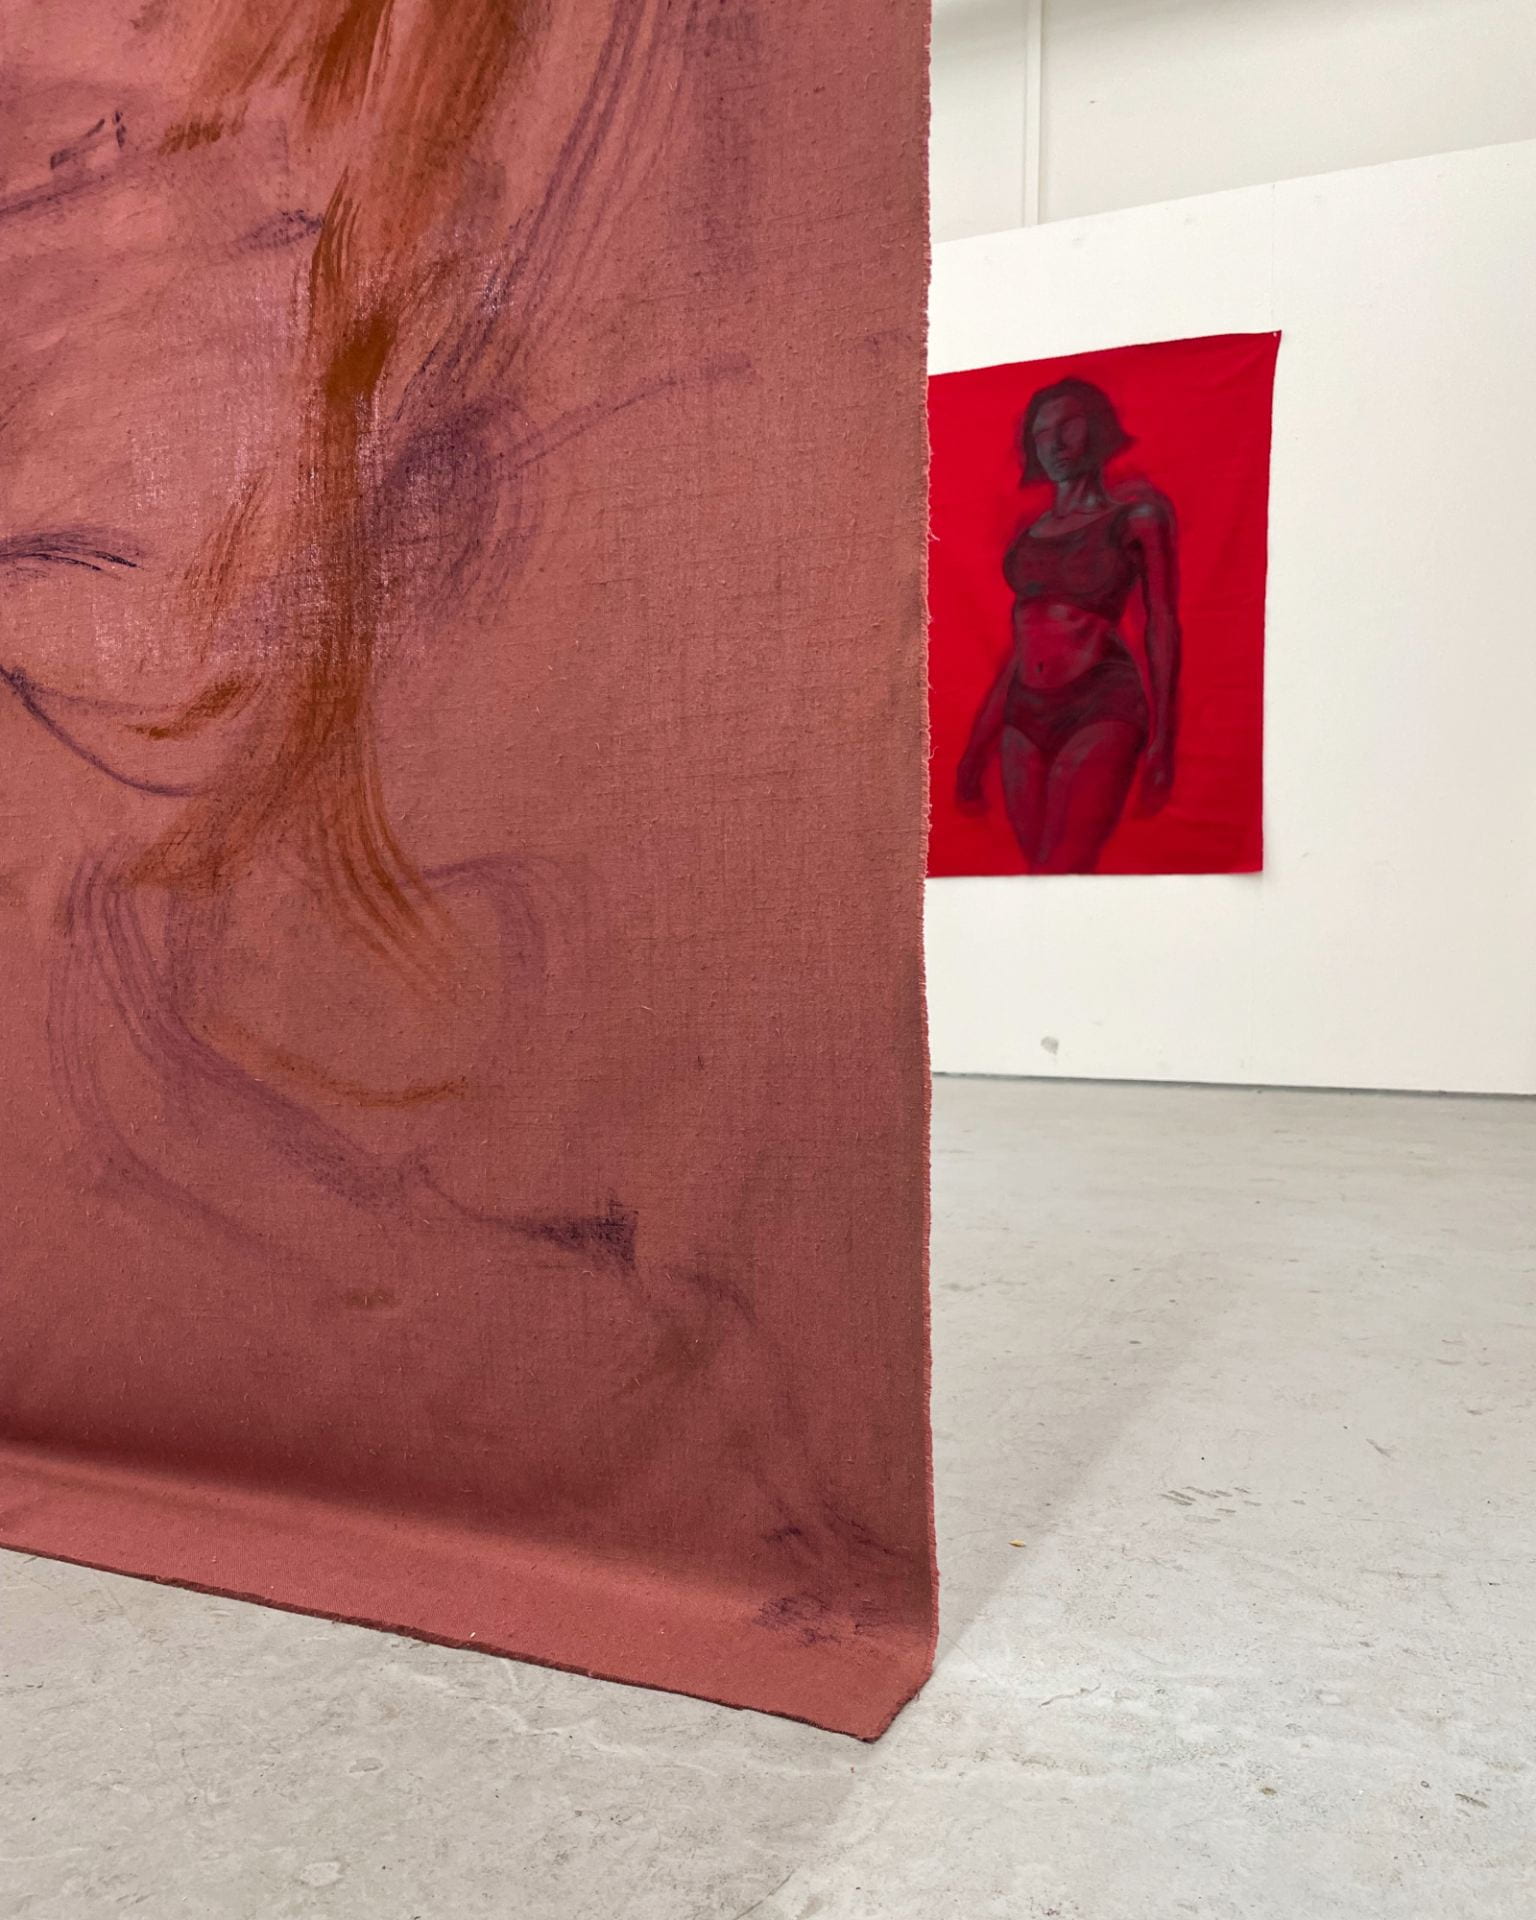 abstract movement is displayed on soft mauve fabric which drapes onto the floor, a female figure on vibrant red fabric looms in the background